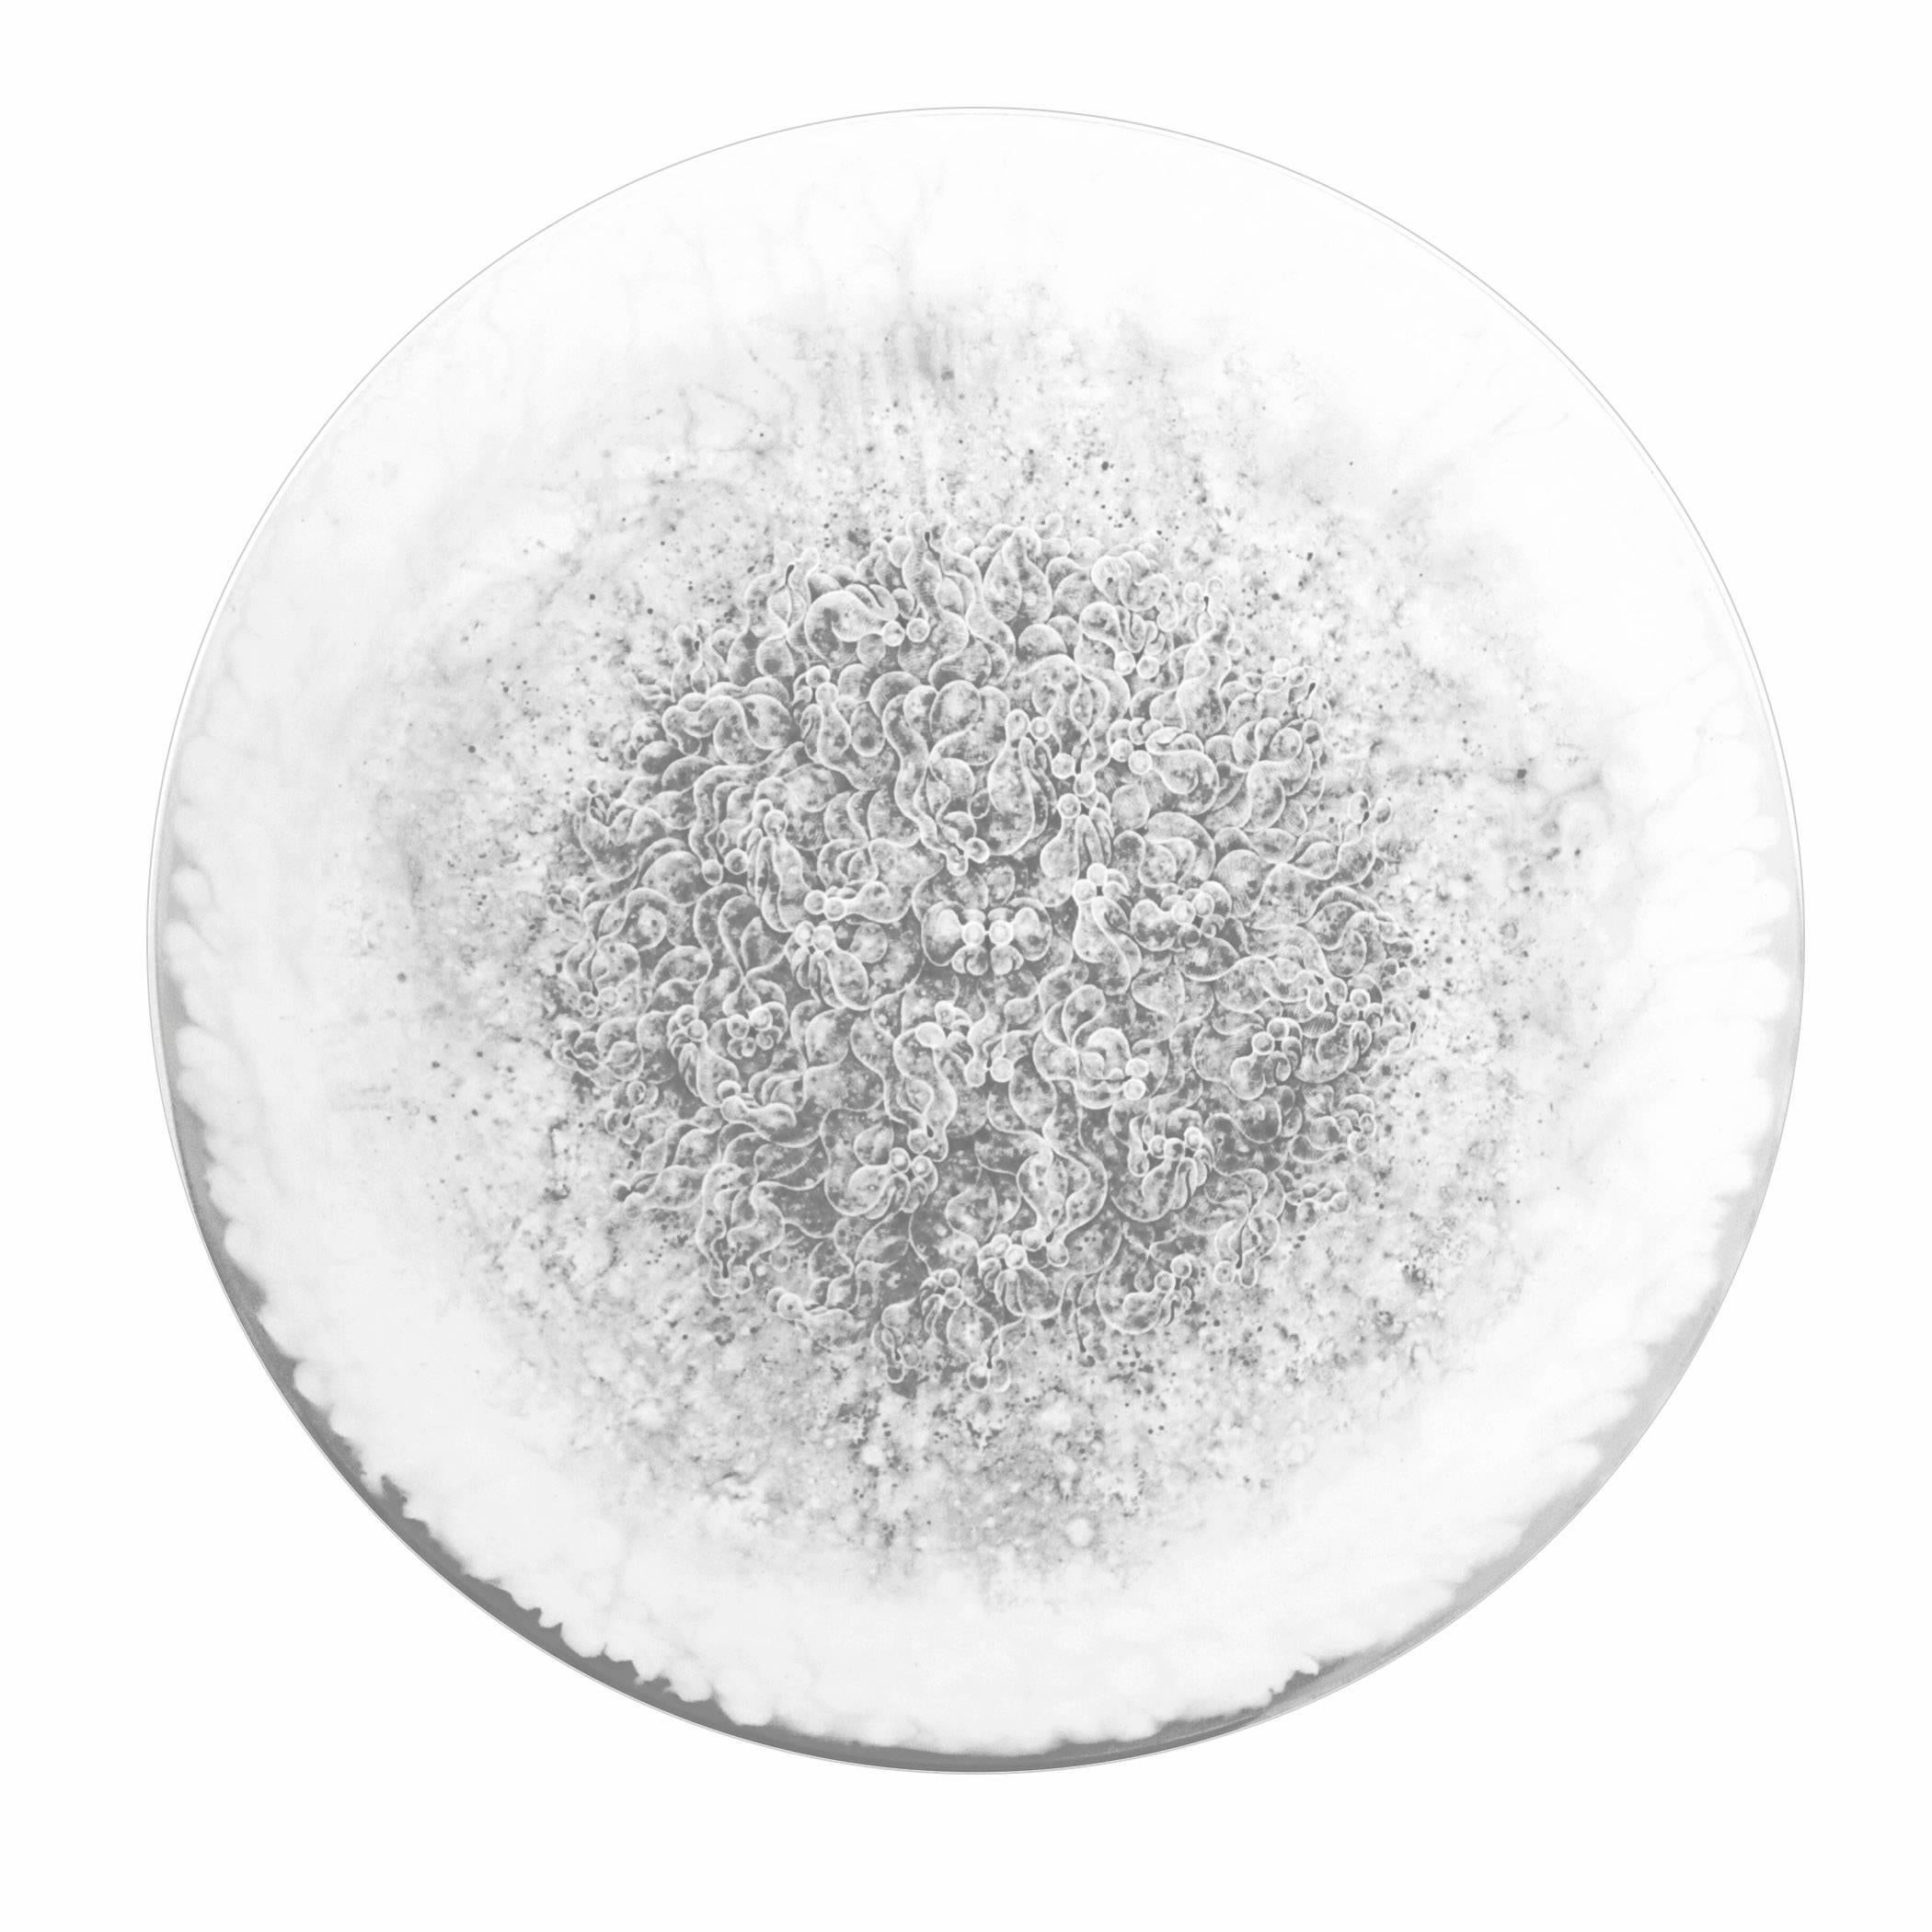 Carol Prusa, Abundant, 2014
Silverpoint, Graphite, White Pigment with Acrylic Binder on Acrylic Circular Panel 24 x 24 x 1 inches, wall mounted

Carol Prusa received her B.S. in Bio-communication Arts from the University of Illinois Medical